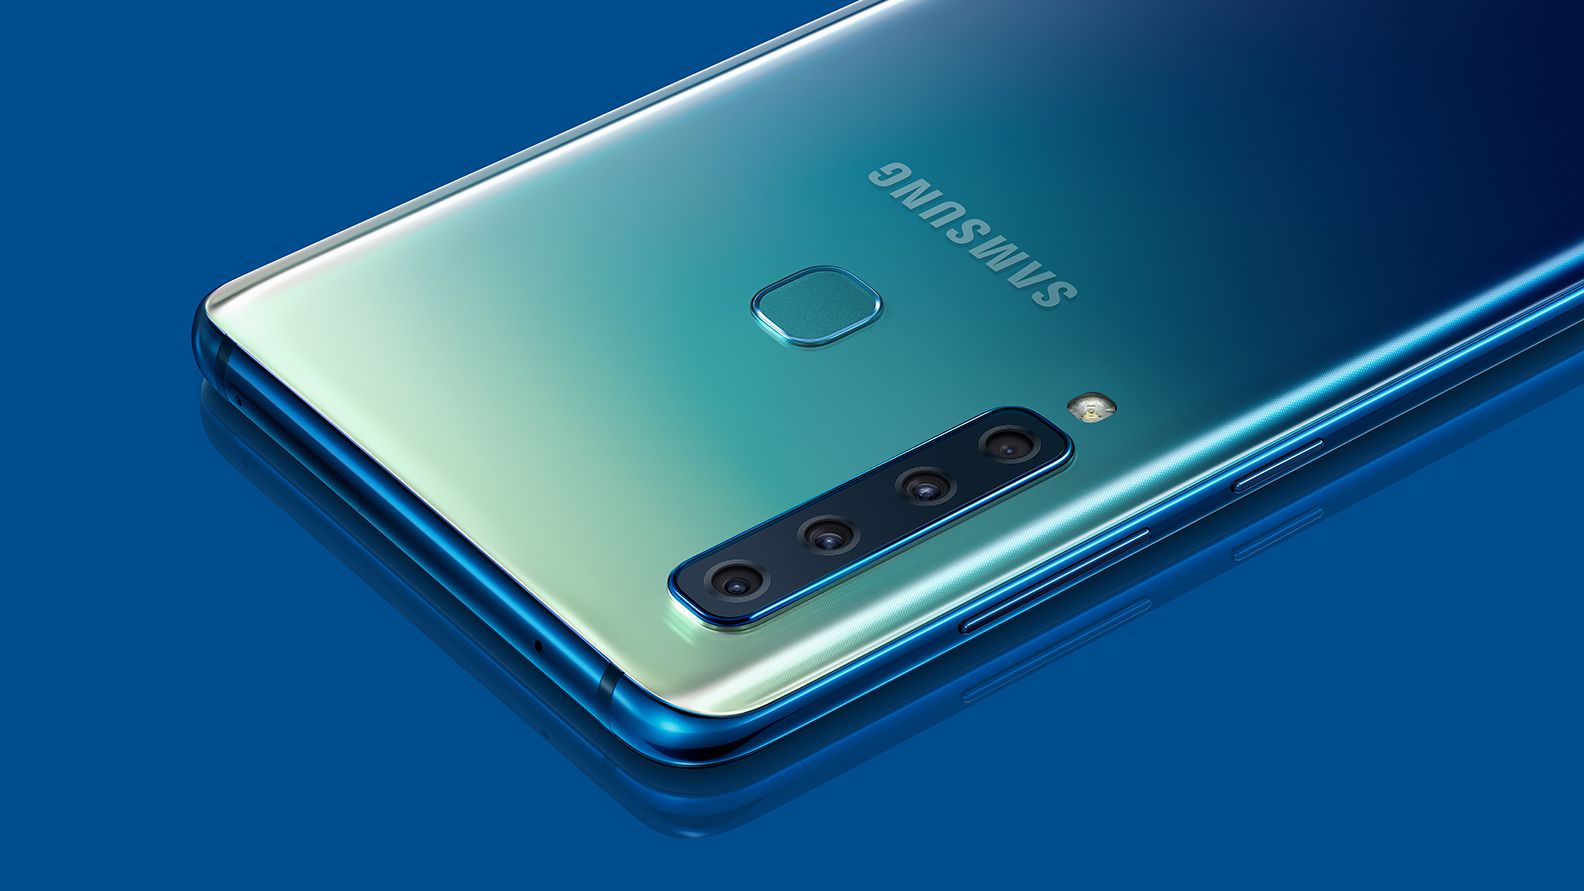 Specs Of The Samsung Galaxy A10 A30 And A50 Are Fully Revealed